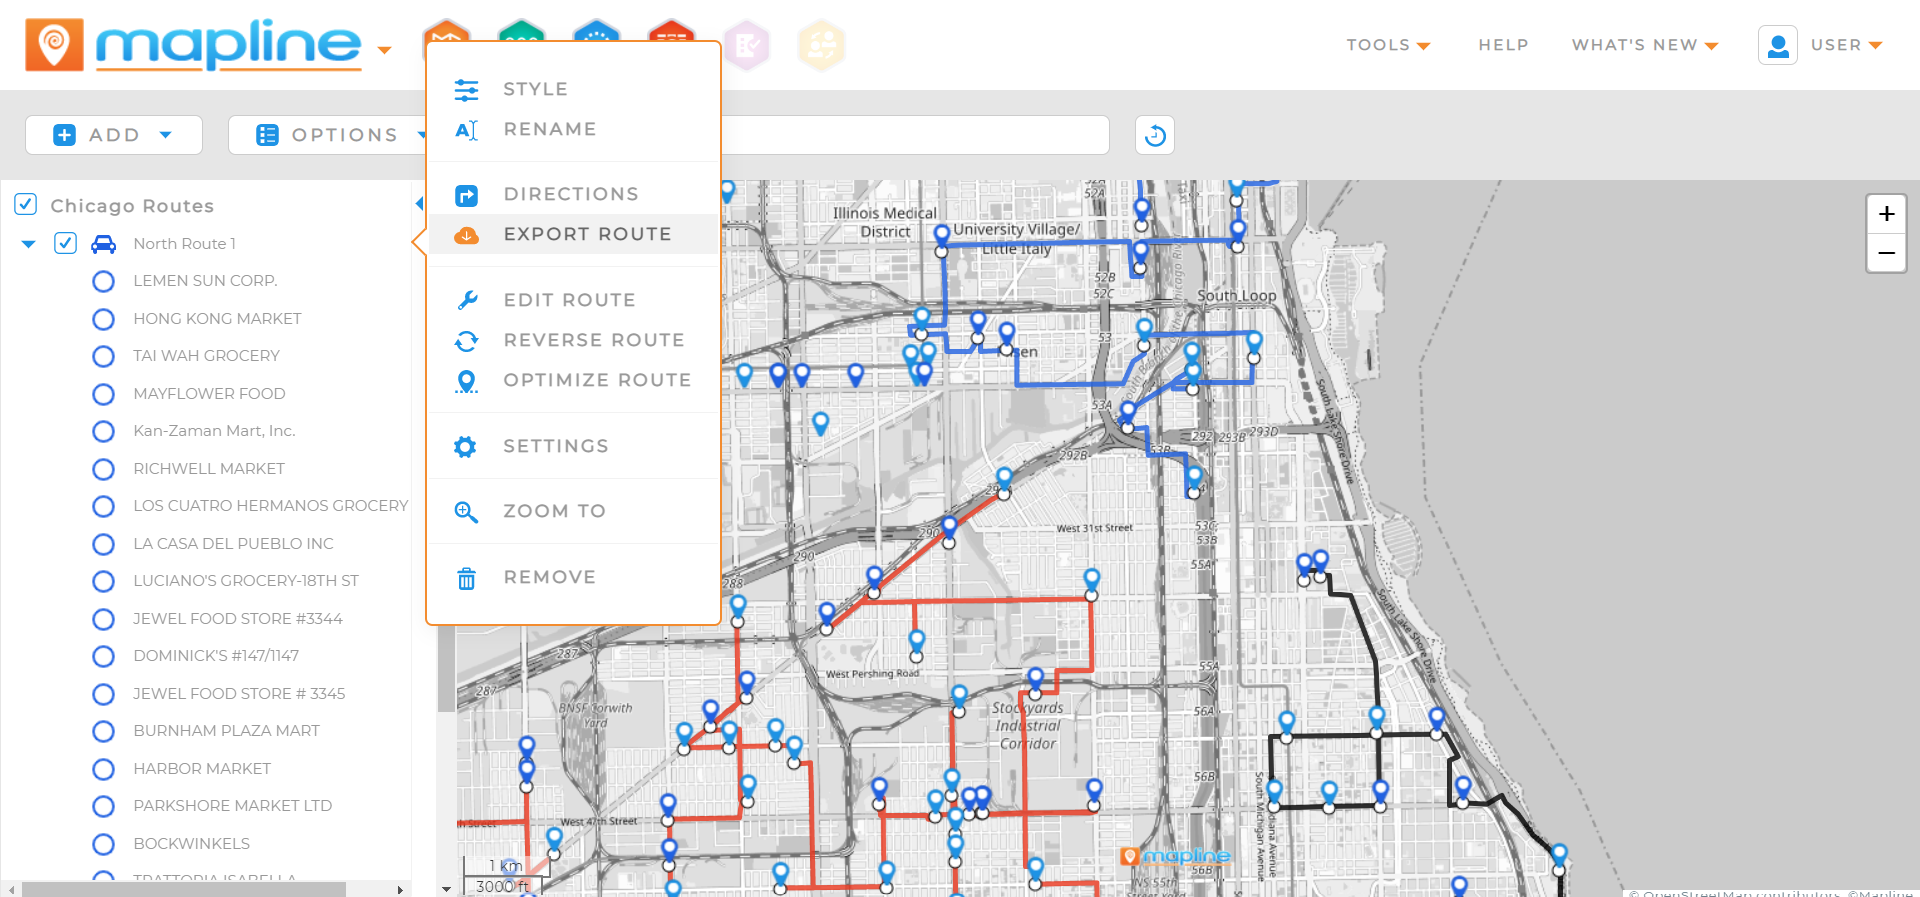 Quickly create optimized routes from customer locations.